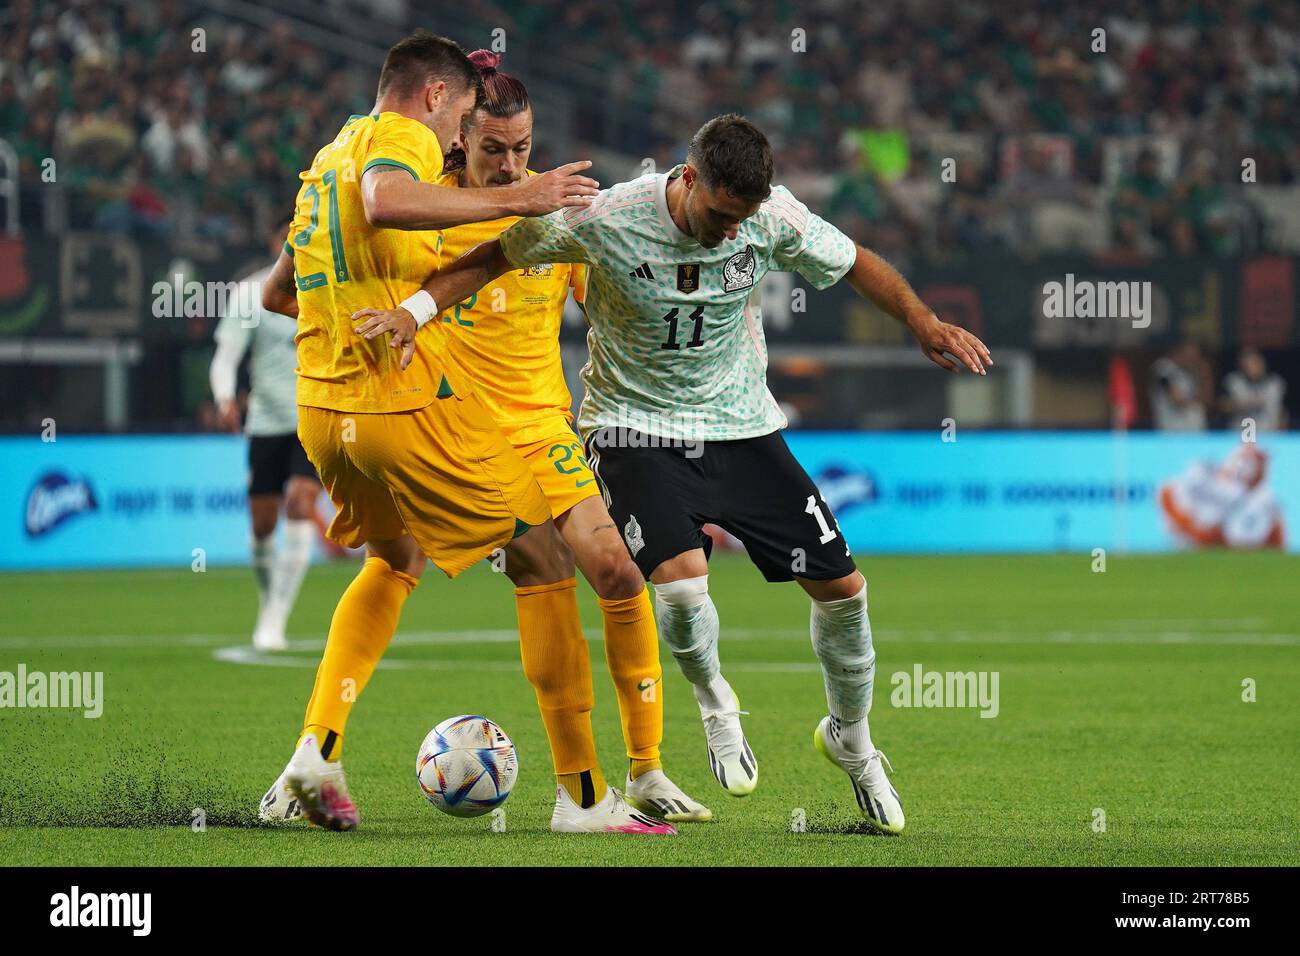 Arlington, Texas, United States: Santiago Gimenez (MX) in action against Cameron Burgess (AU) and Jackson Irvine (AU) during the international soccer game between Mexico and Australia played at AT&T Stadium on Saturday September 9, 2023.  (Photo by Javier Vicencio / Eyepix Group/Sipa USA) Stock Photo